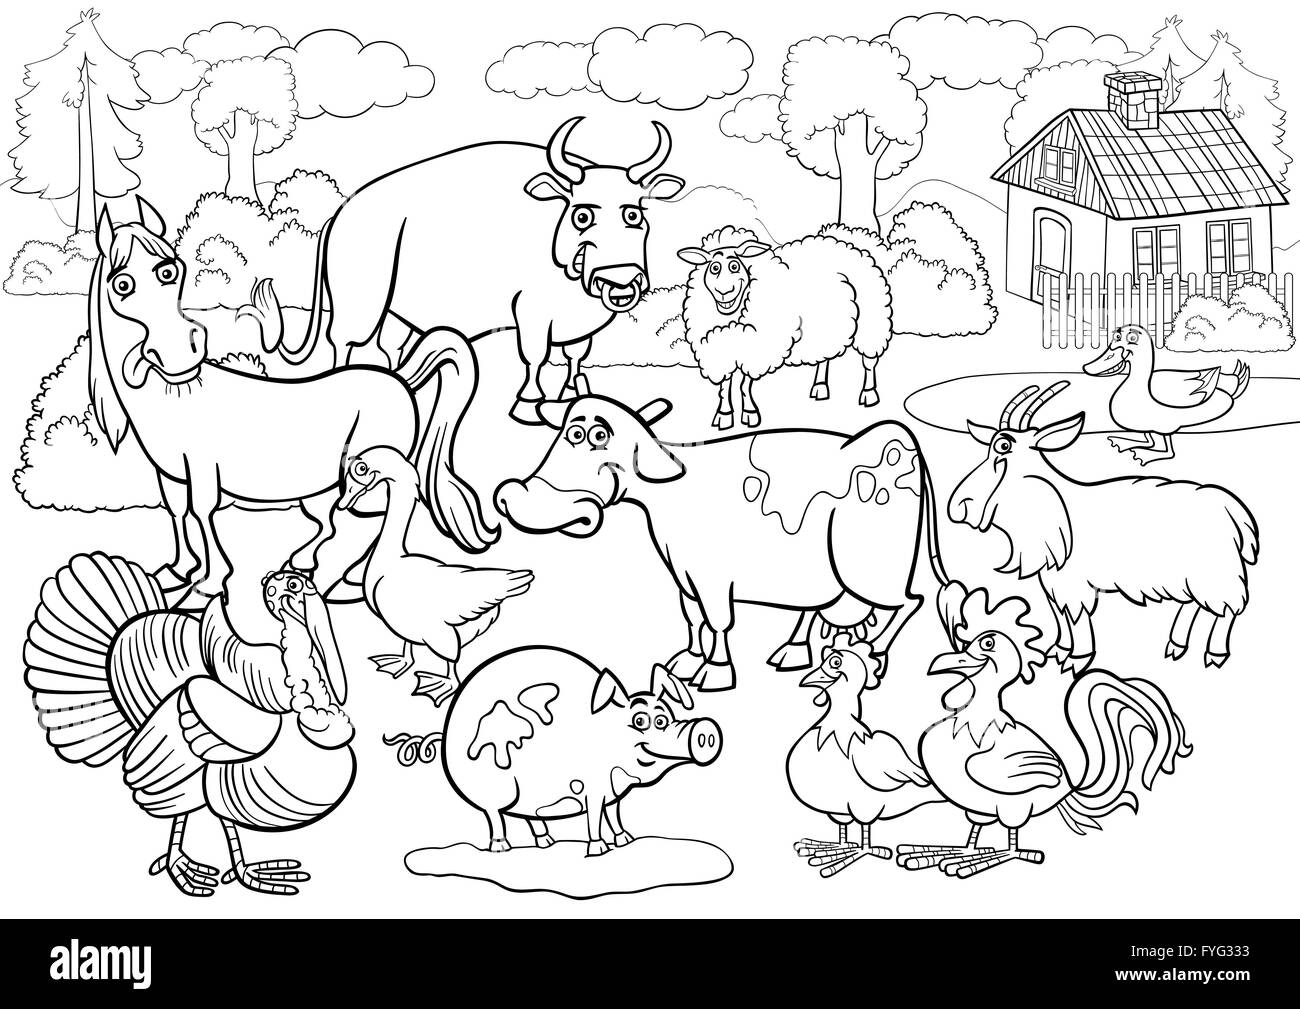 domestic animals pictures for colouring